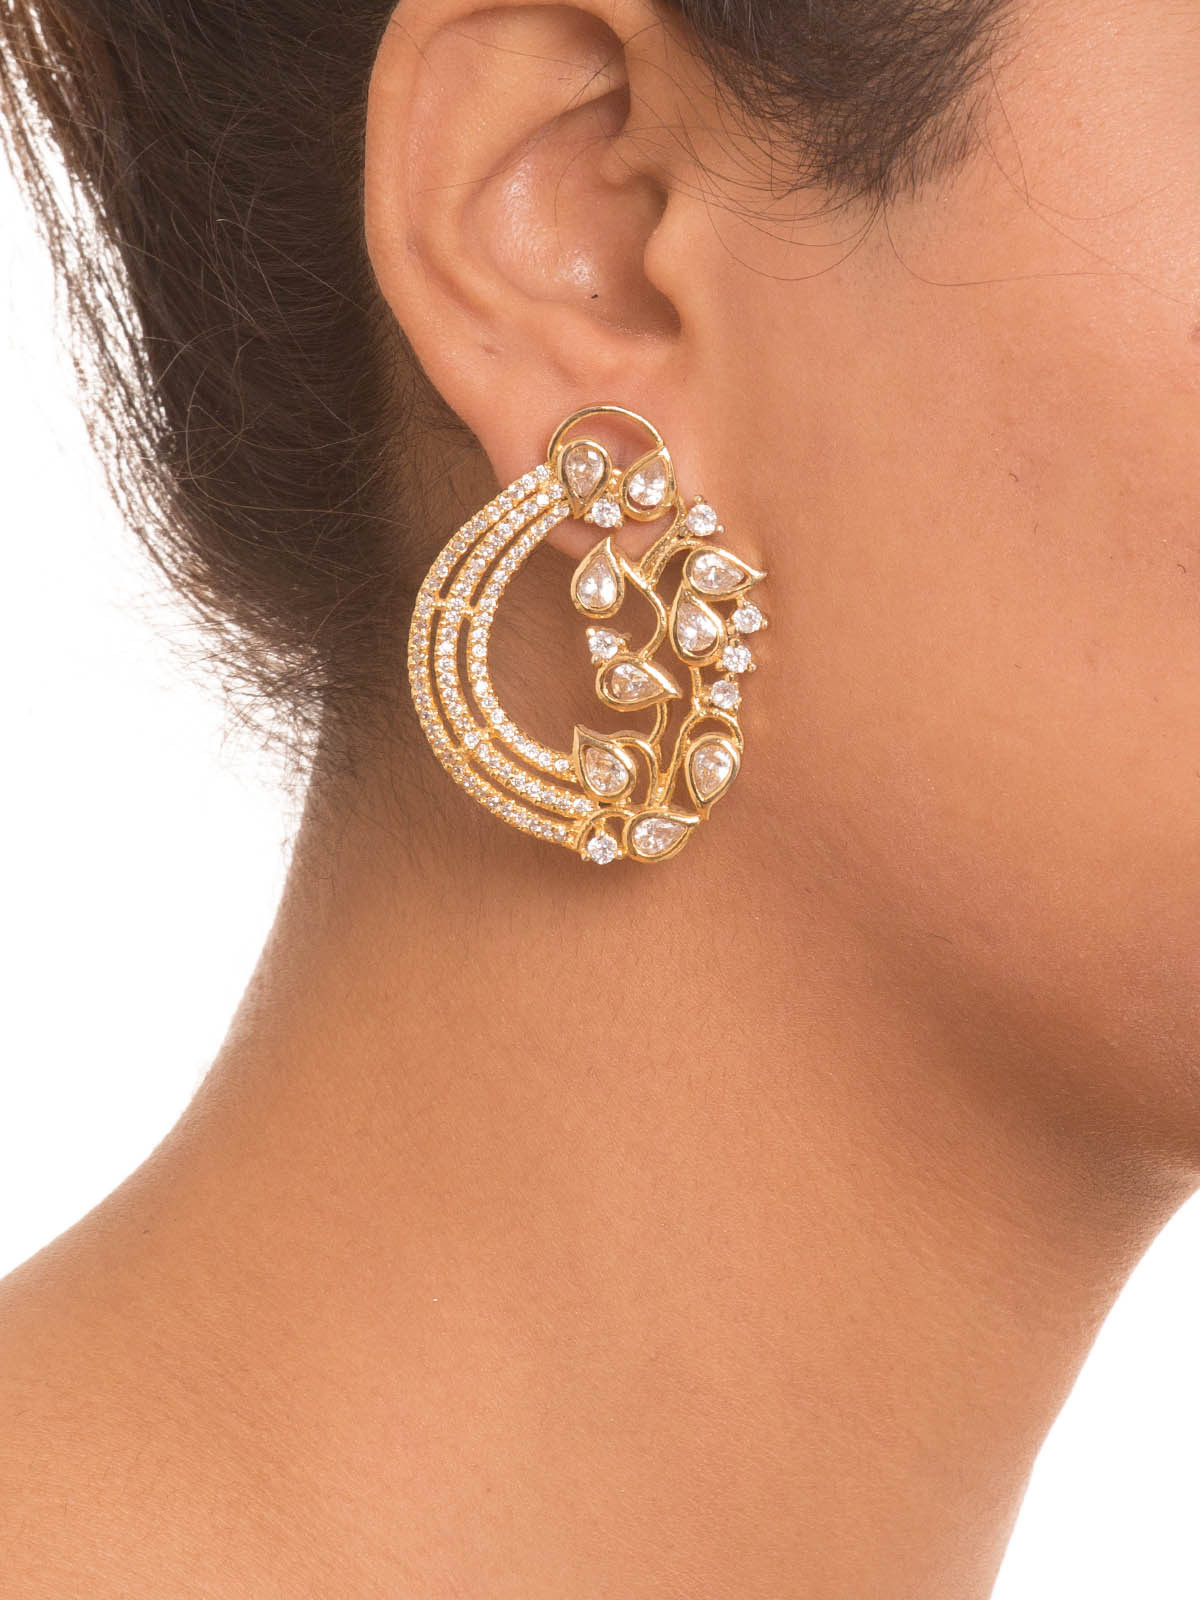 Earring Studs
 Buy Ghanthan Jewels Earrings Gold Plated Diamond Studs at